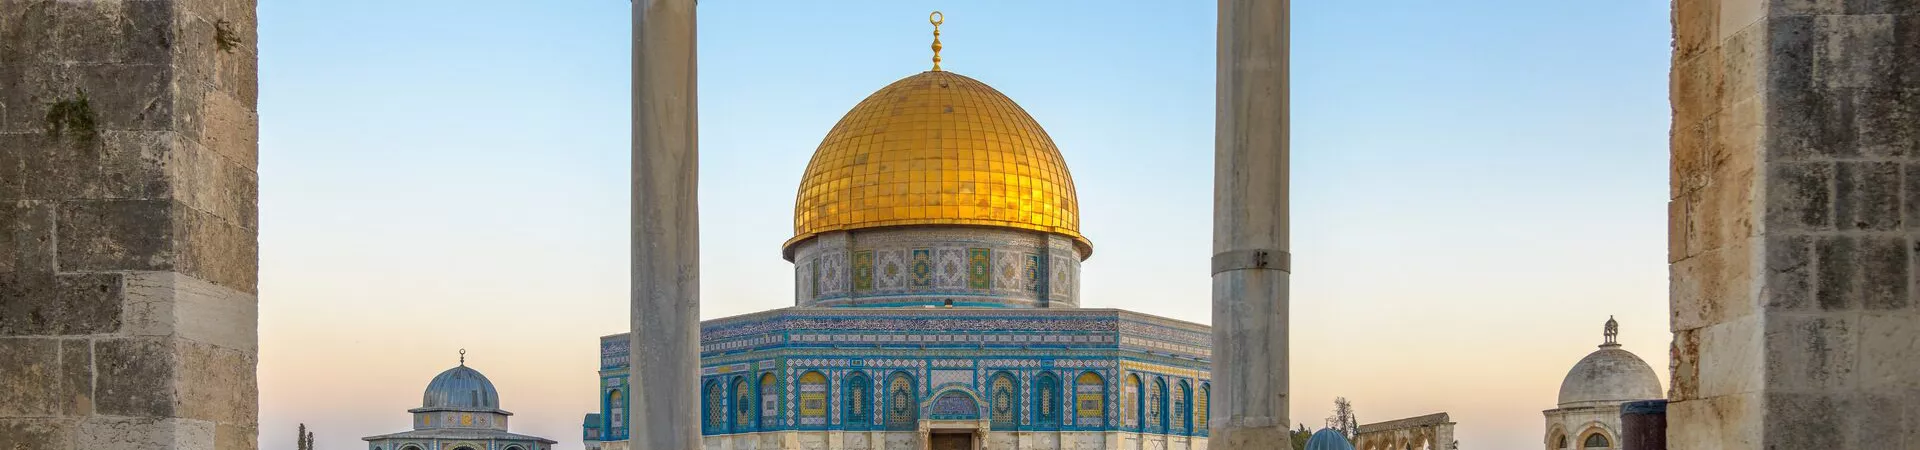 Dome Of The Rock In Jerusalem